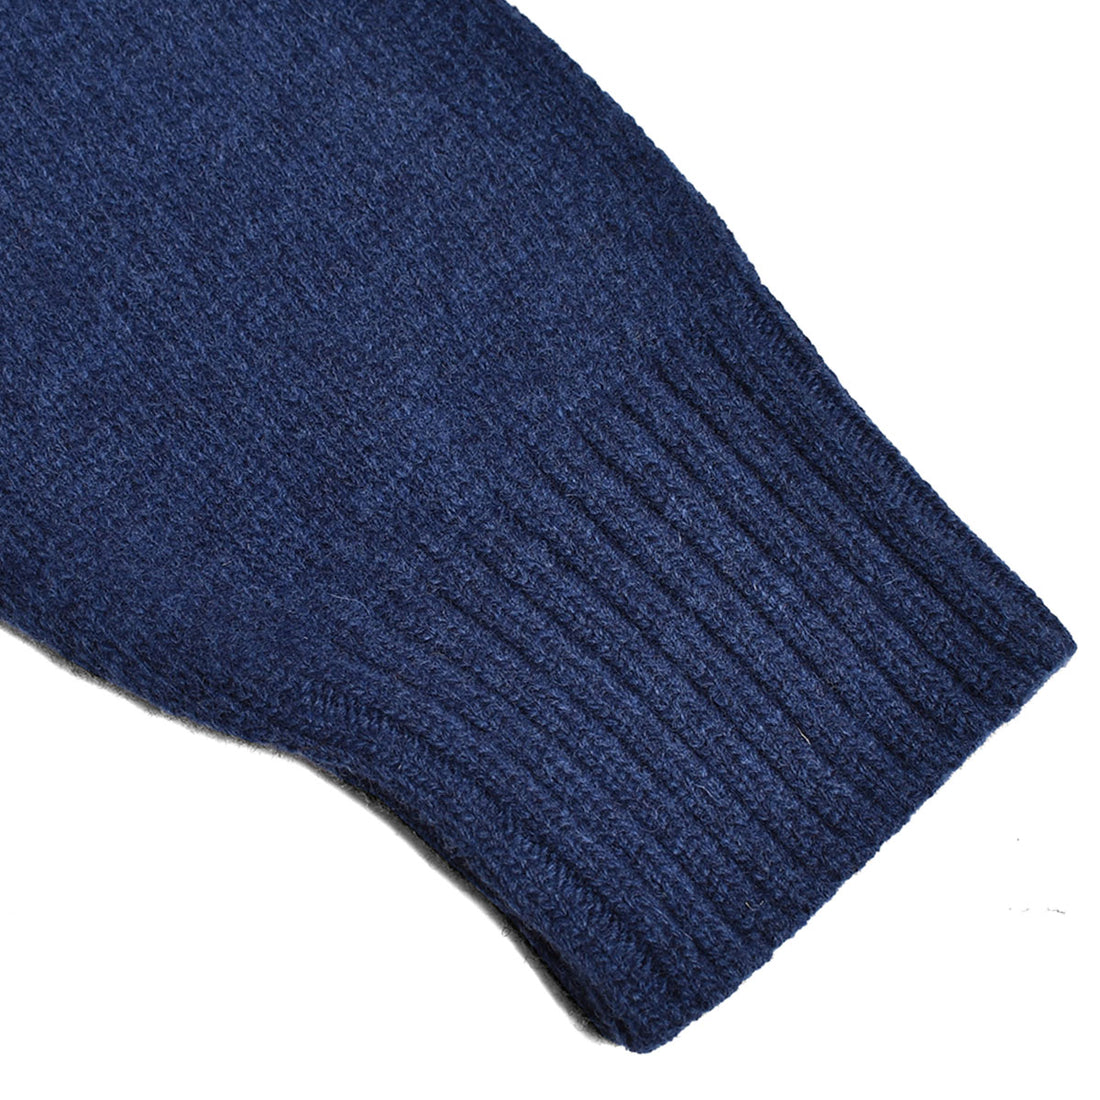 [S.S. Daley]KNIT SWEATER WITH DUCK INTARSIA/NAVY(SSDF23DUCKC)